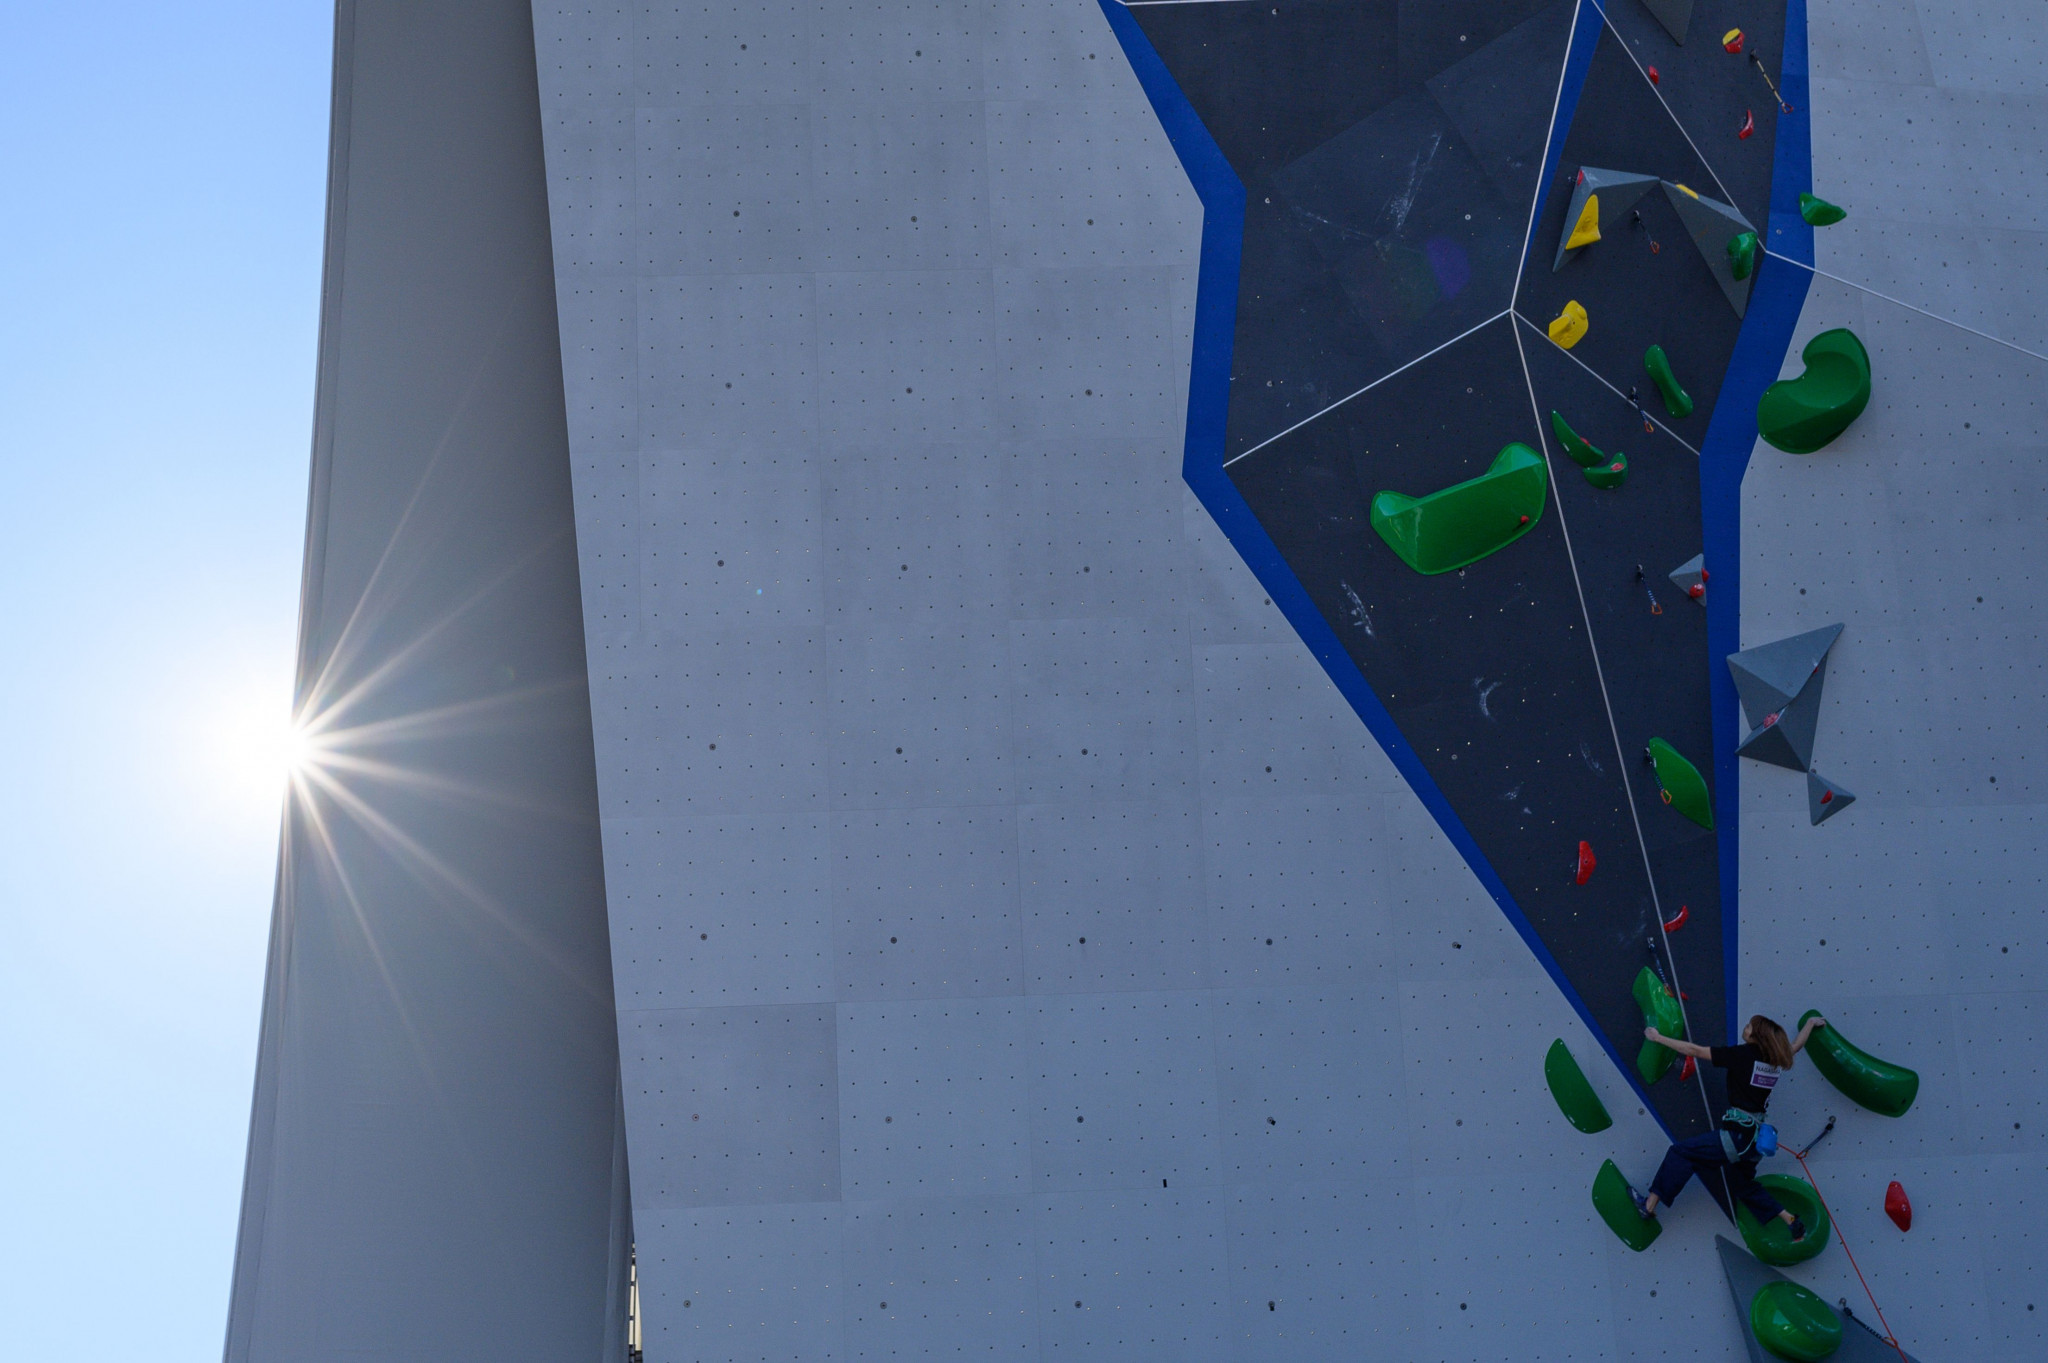 Copar and Kume win women's lead titles at IFSC Youth World Championships